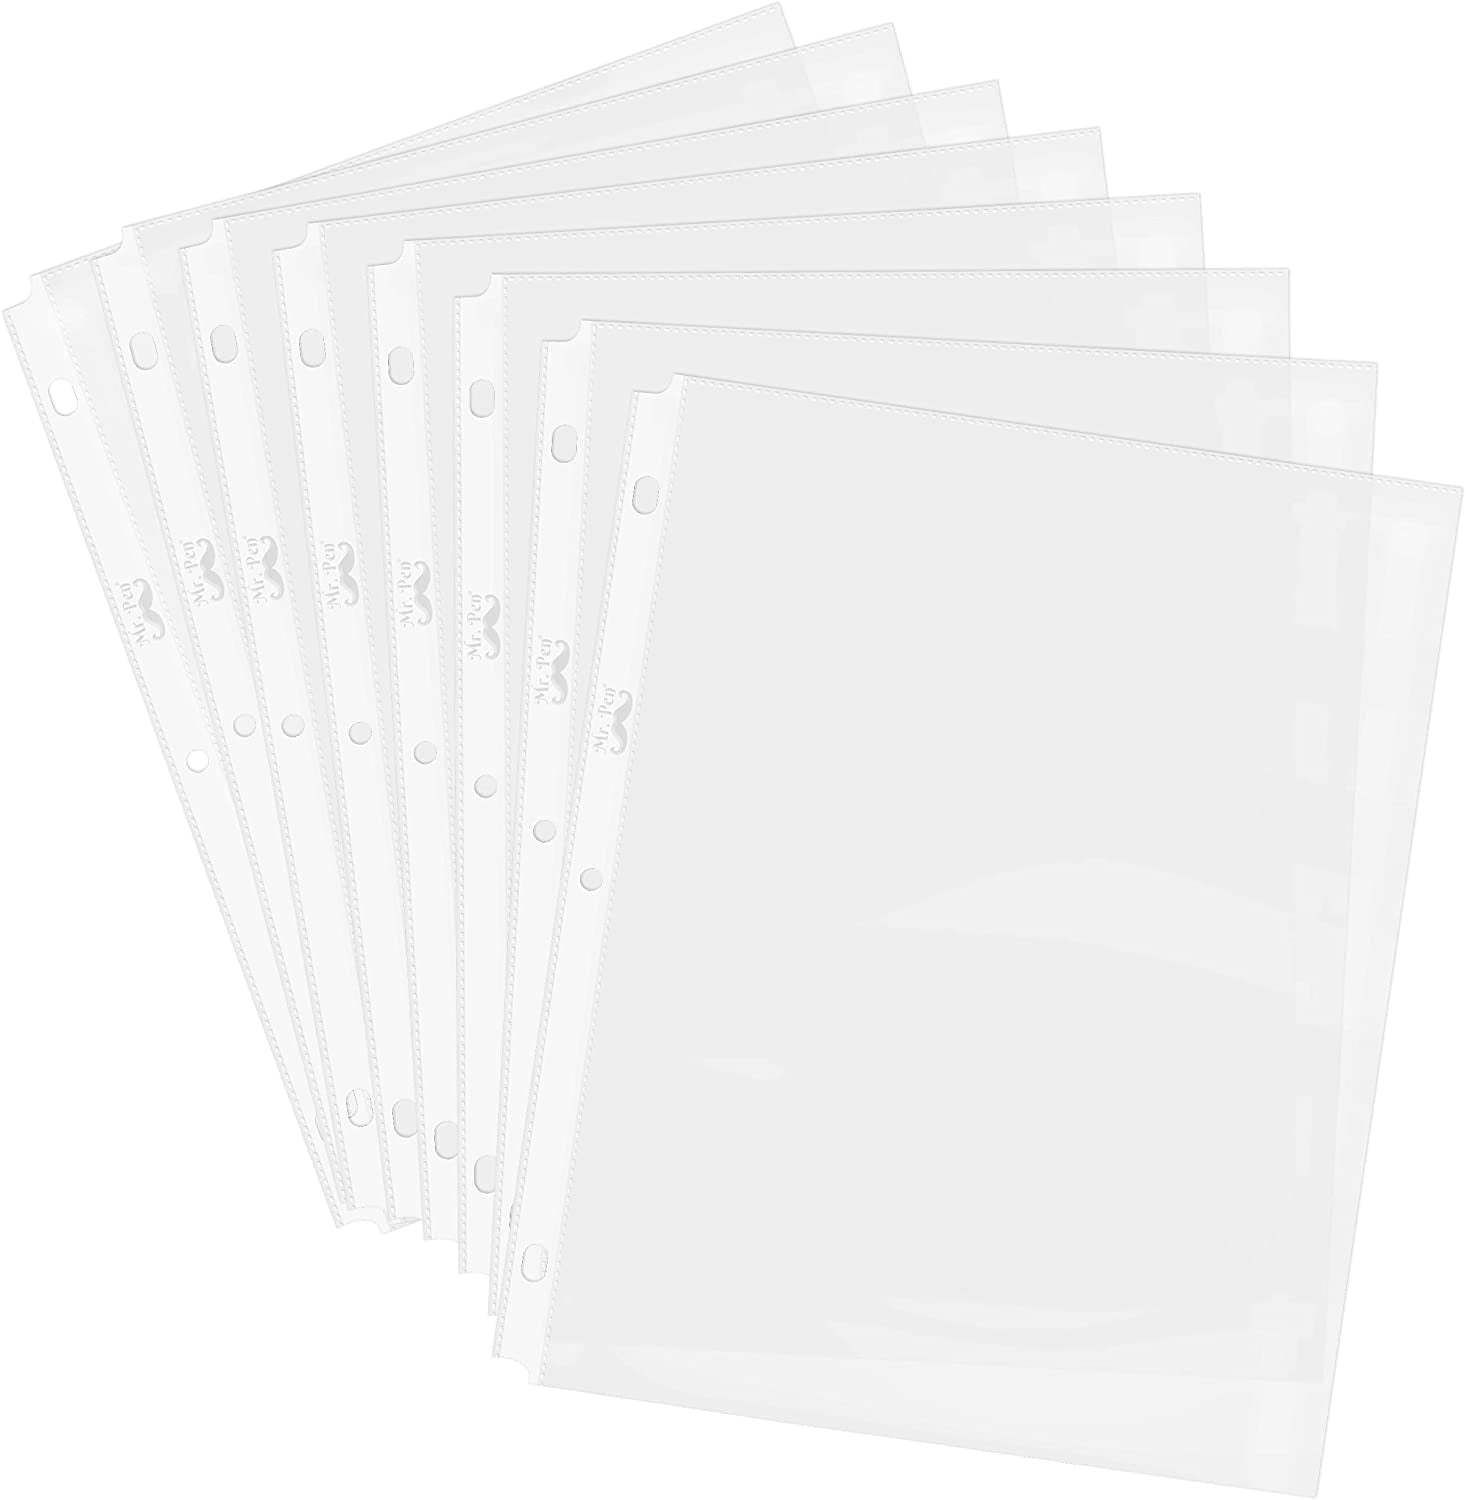 50 Sheet Page Protectors Office Clear Plastic Document Paper Binder Sleeves NEW 